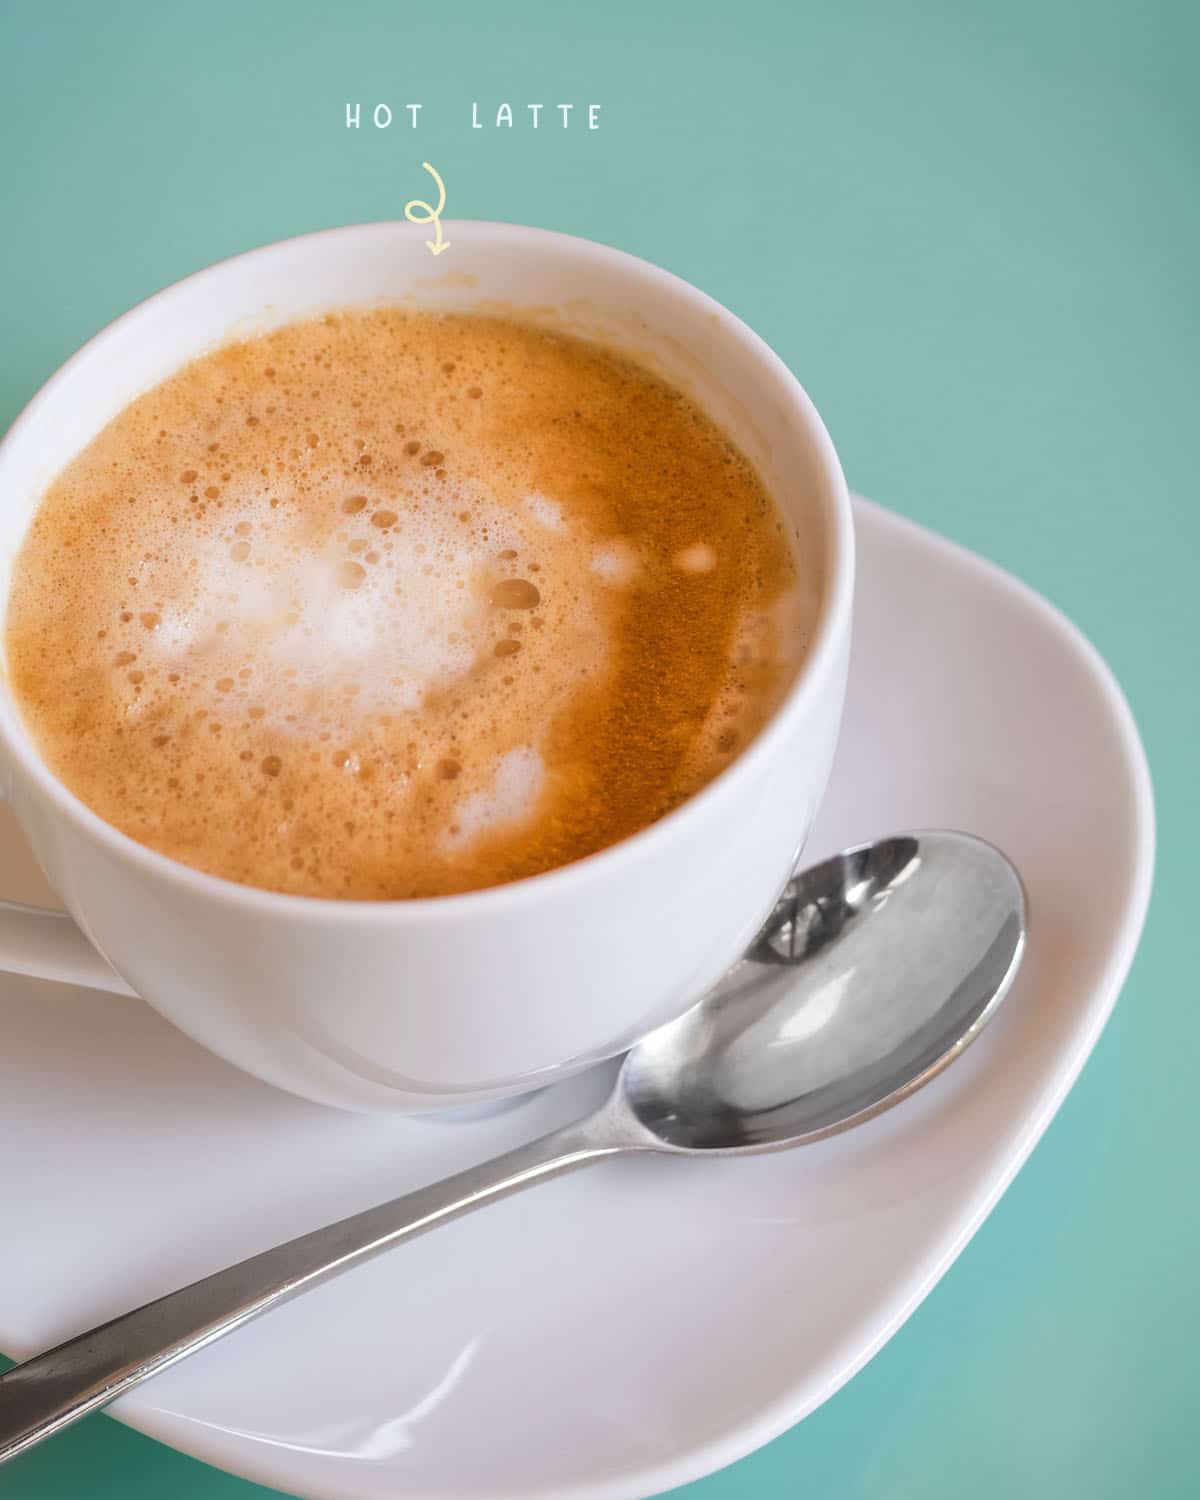 A latte typically contains about 8 ounces of espresso and 12-18 ounces of steamed milk and 2 ounces of foam. 